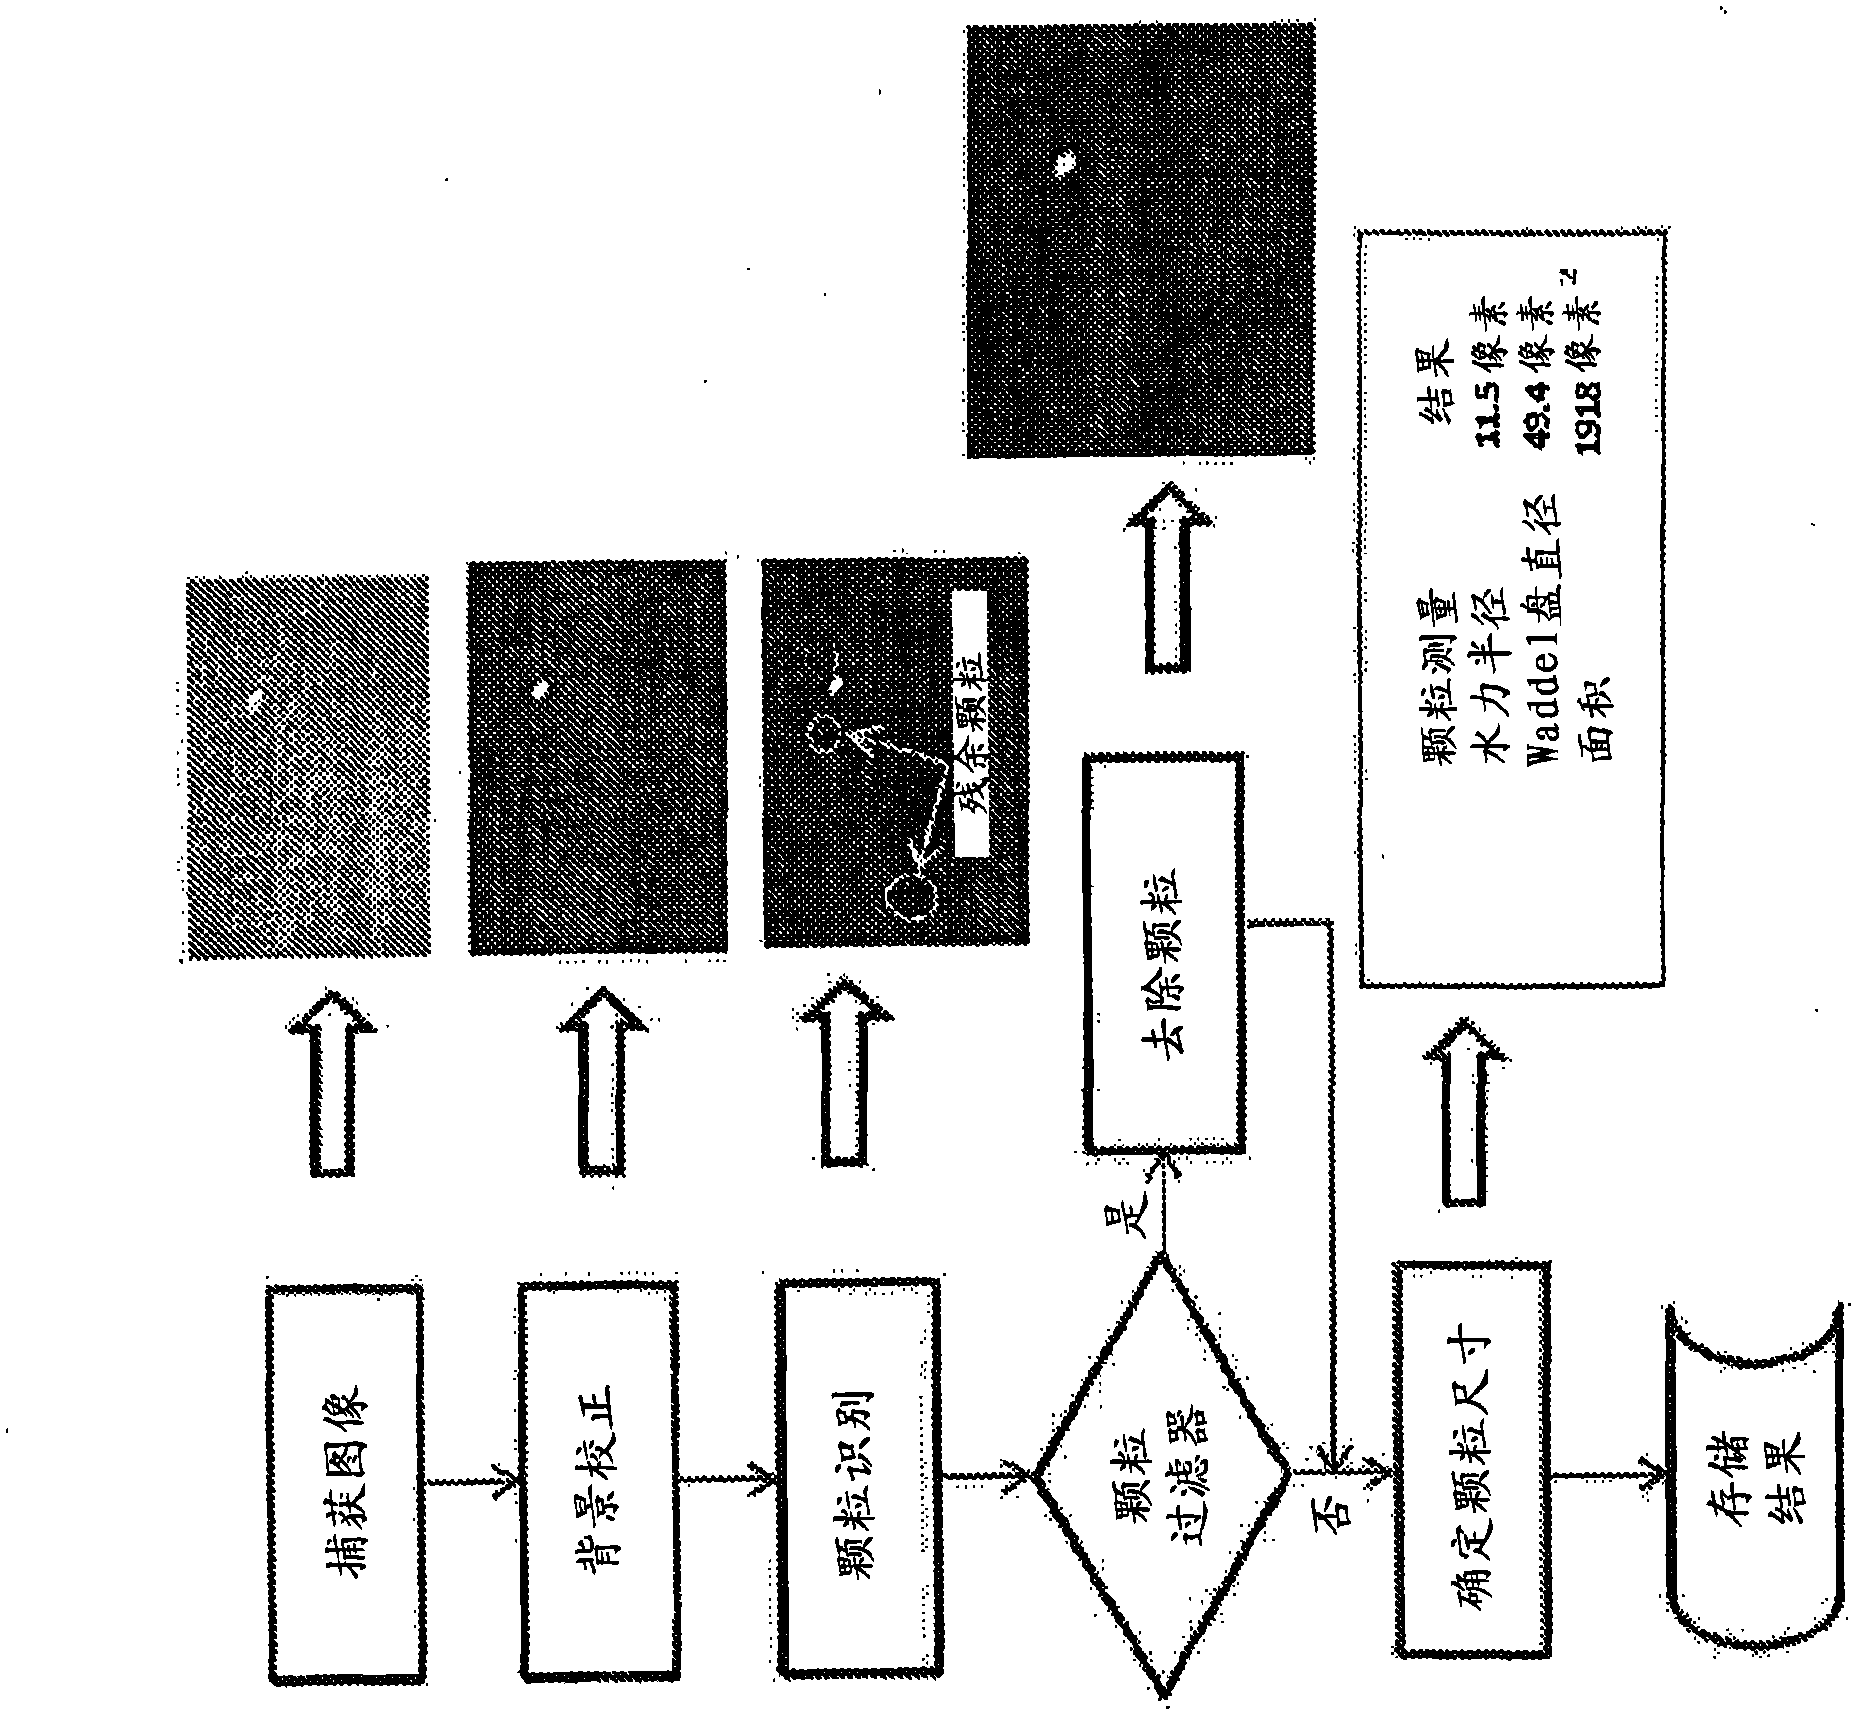 Method of monitoring macrostickies in recycling and paper or tissue making process involving recycled pulp